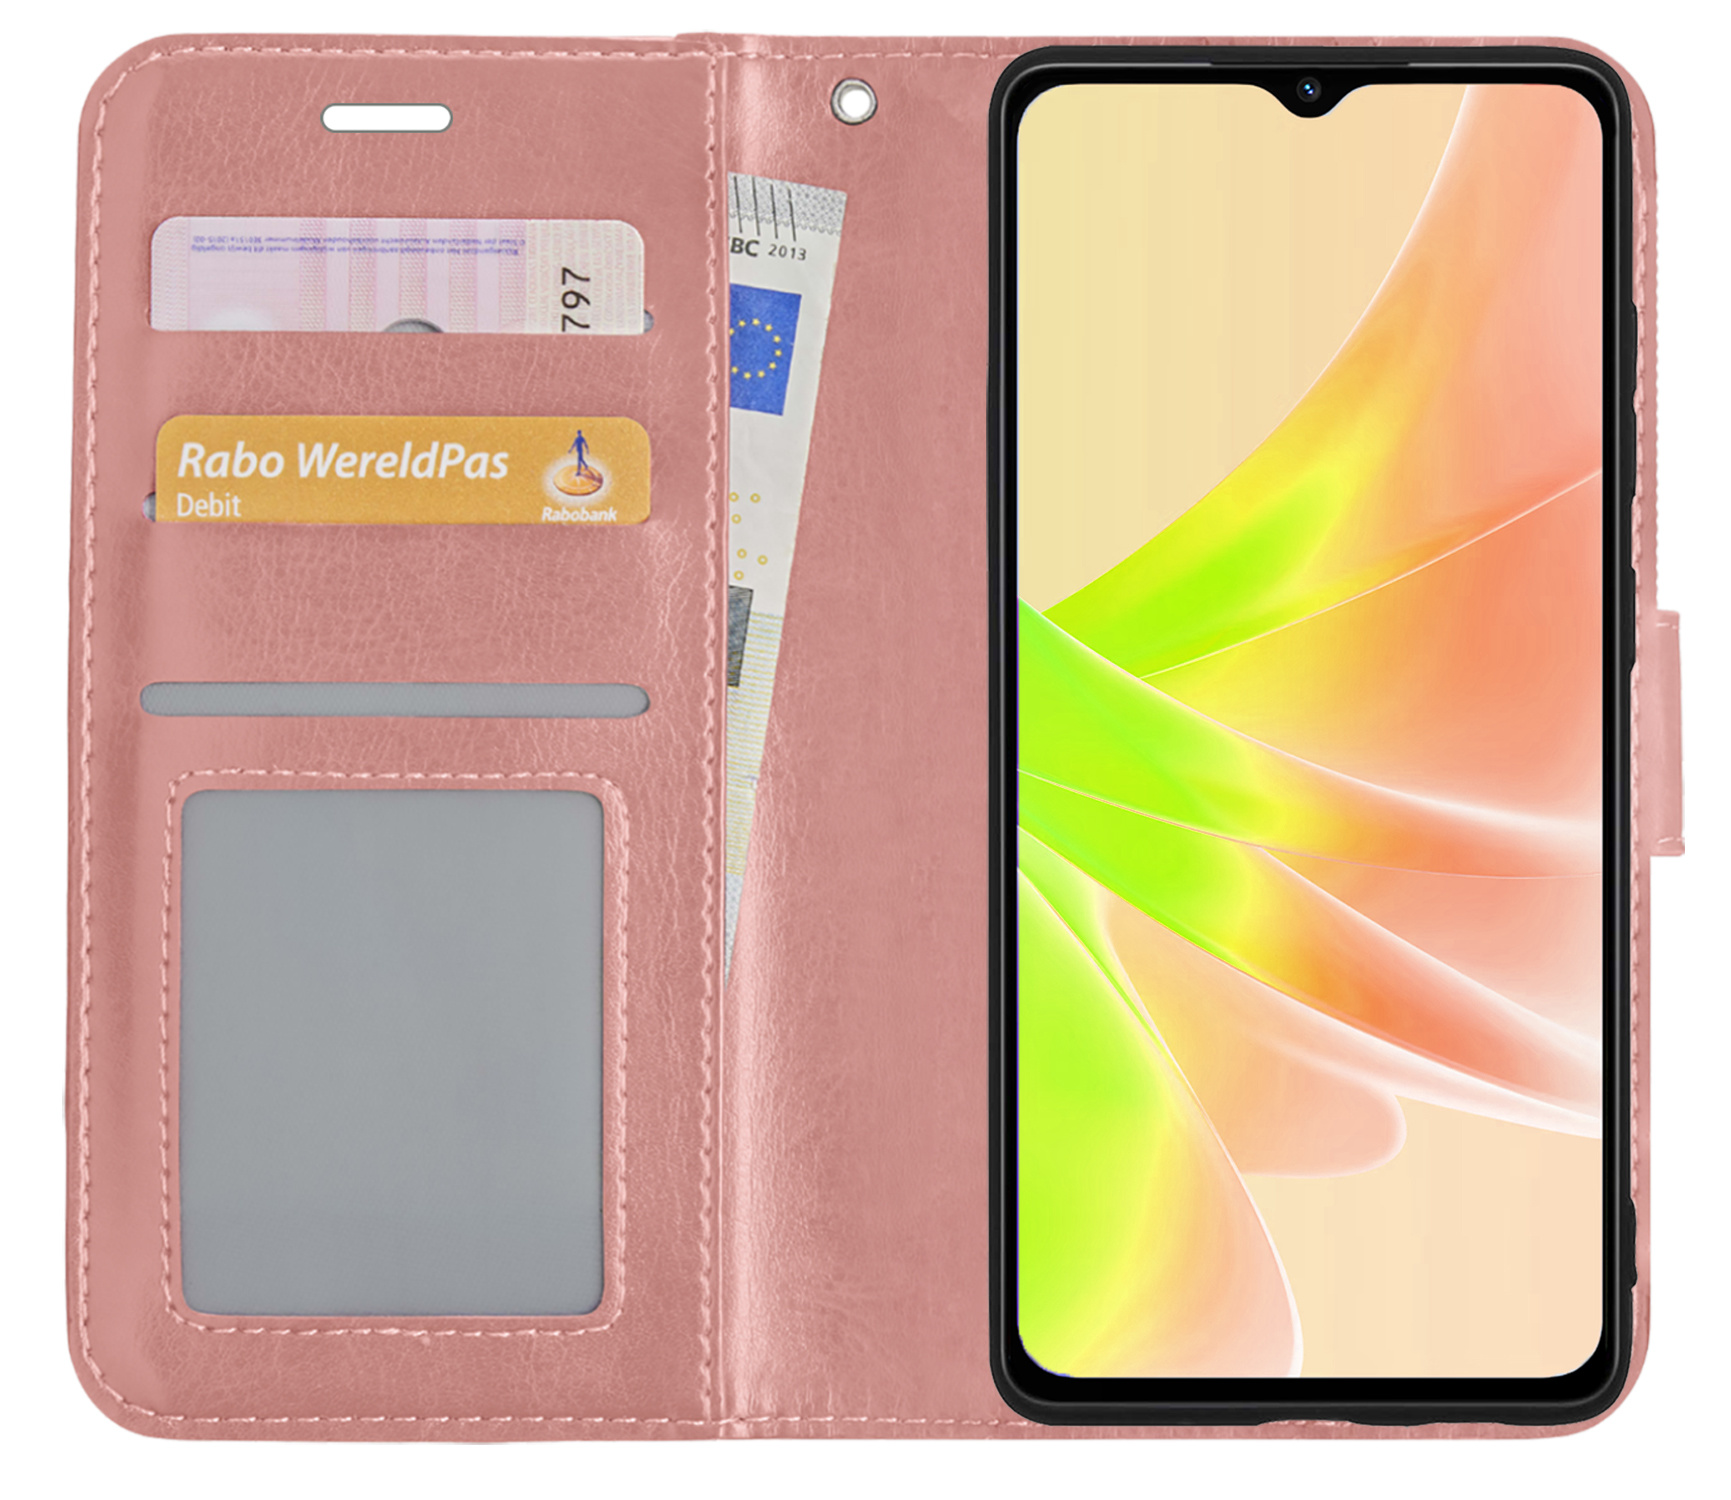 OPPO A17 Hoesje Book Case Hoes Flip Cover Bookcase Met Screenprotector - Rose Goud